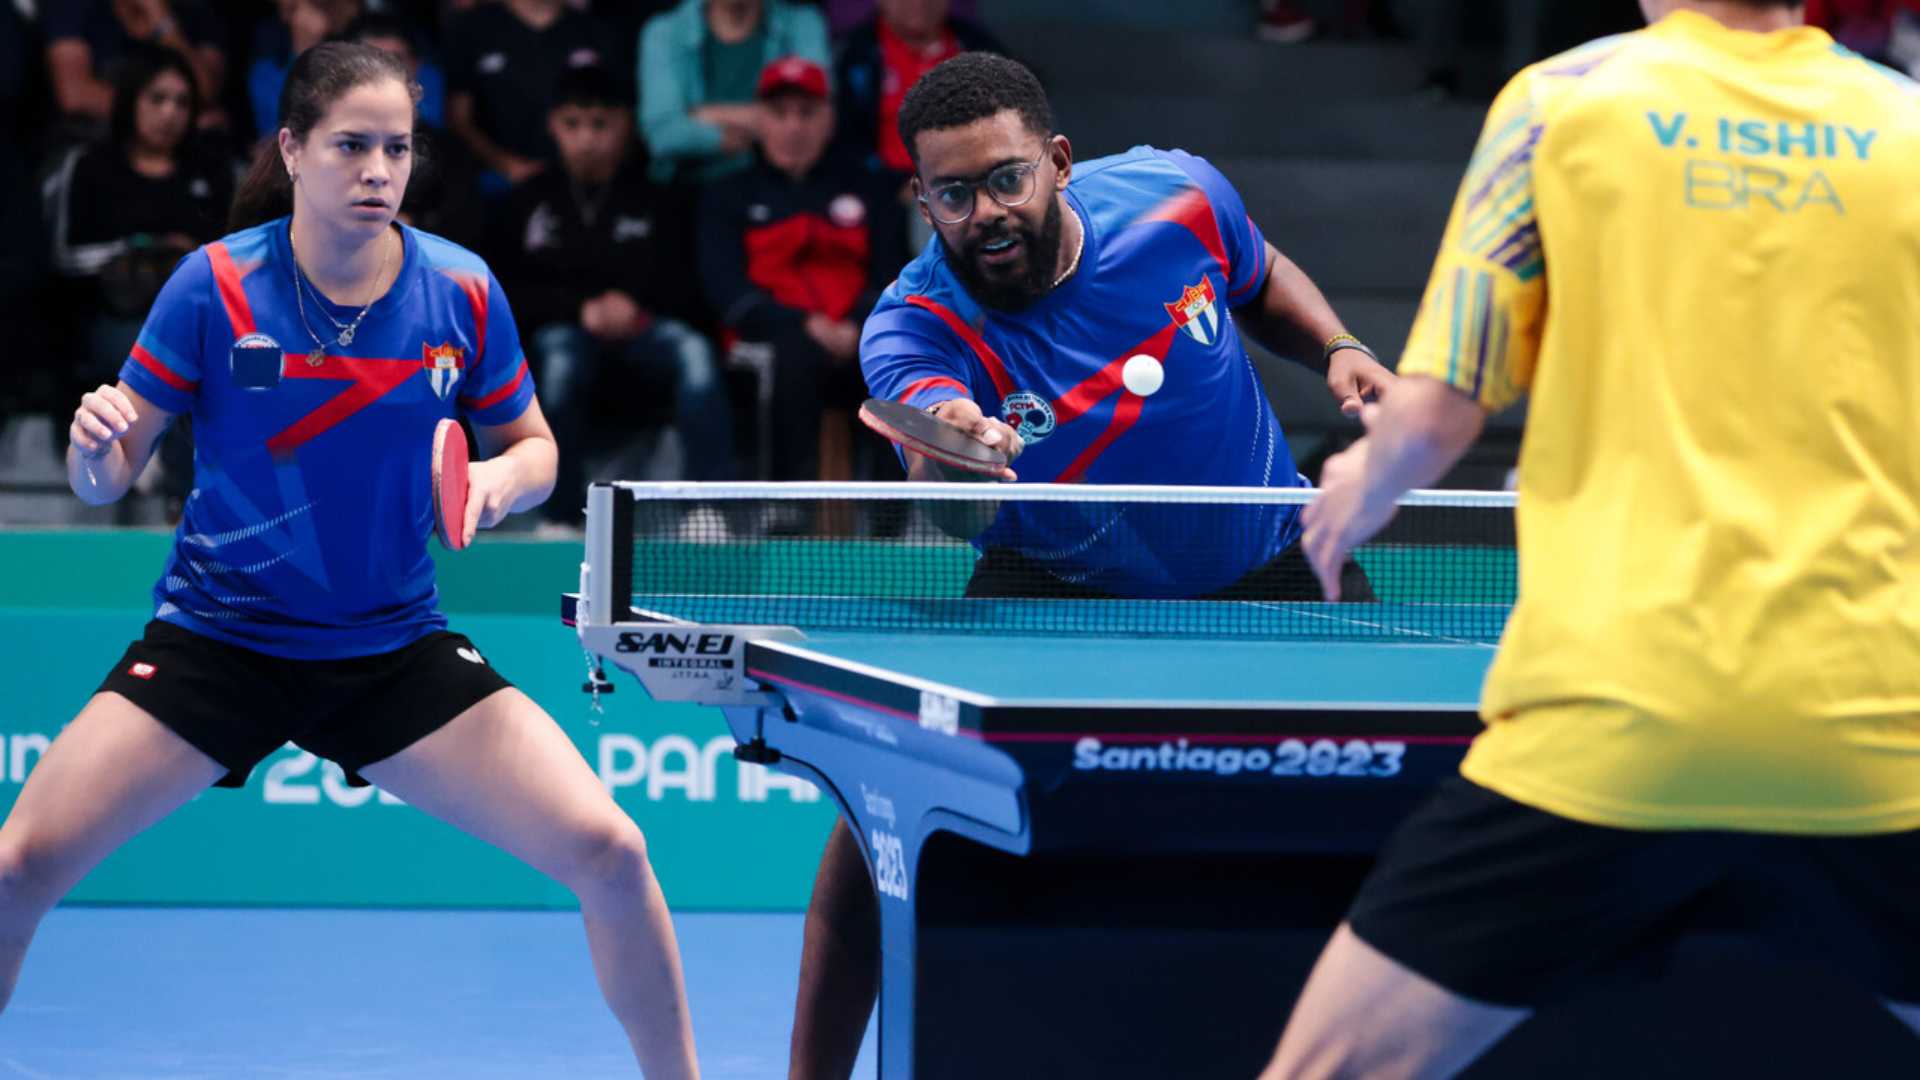 Cuba surprises and defeats Brazil for gold in mixed doubles table tennis